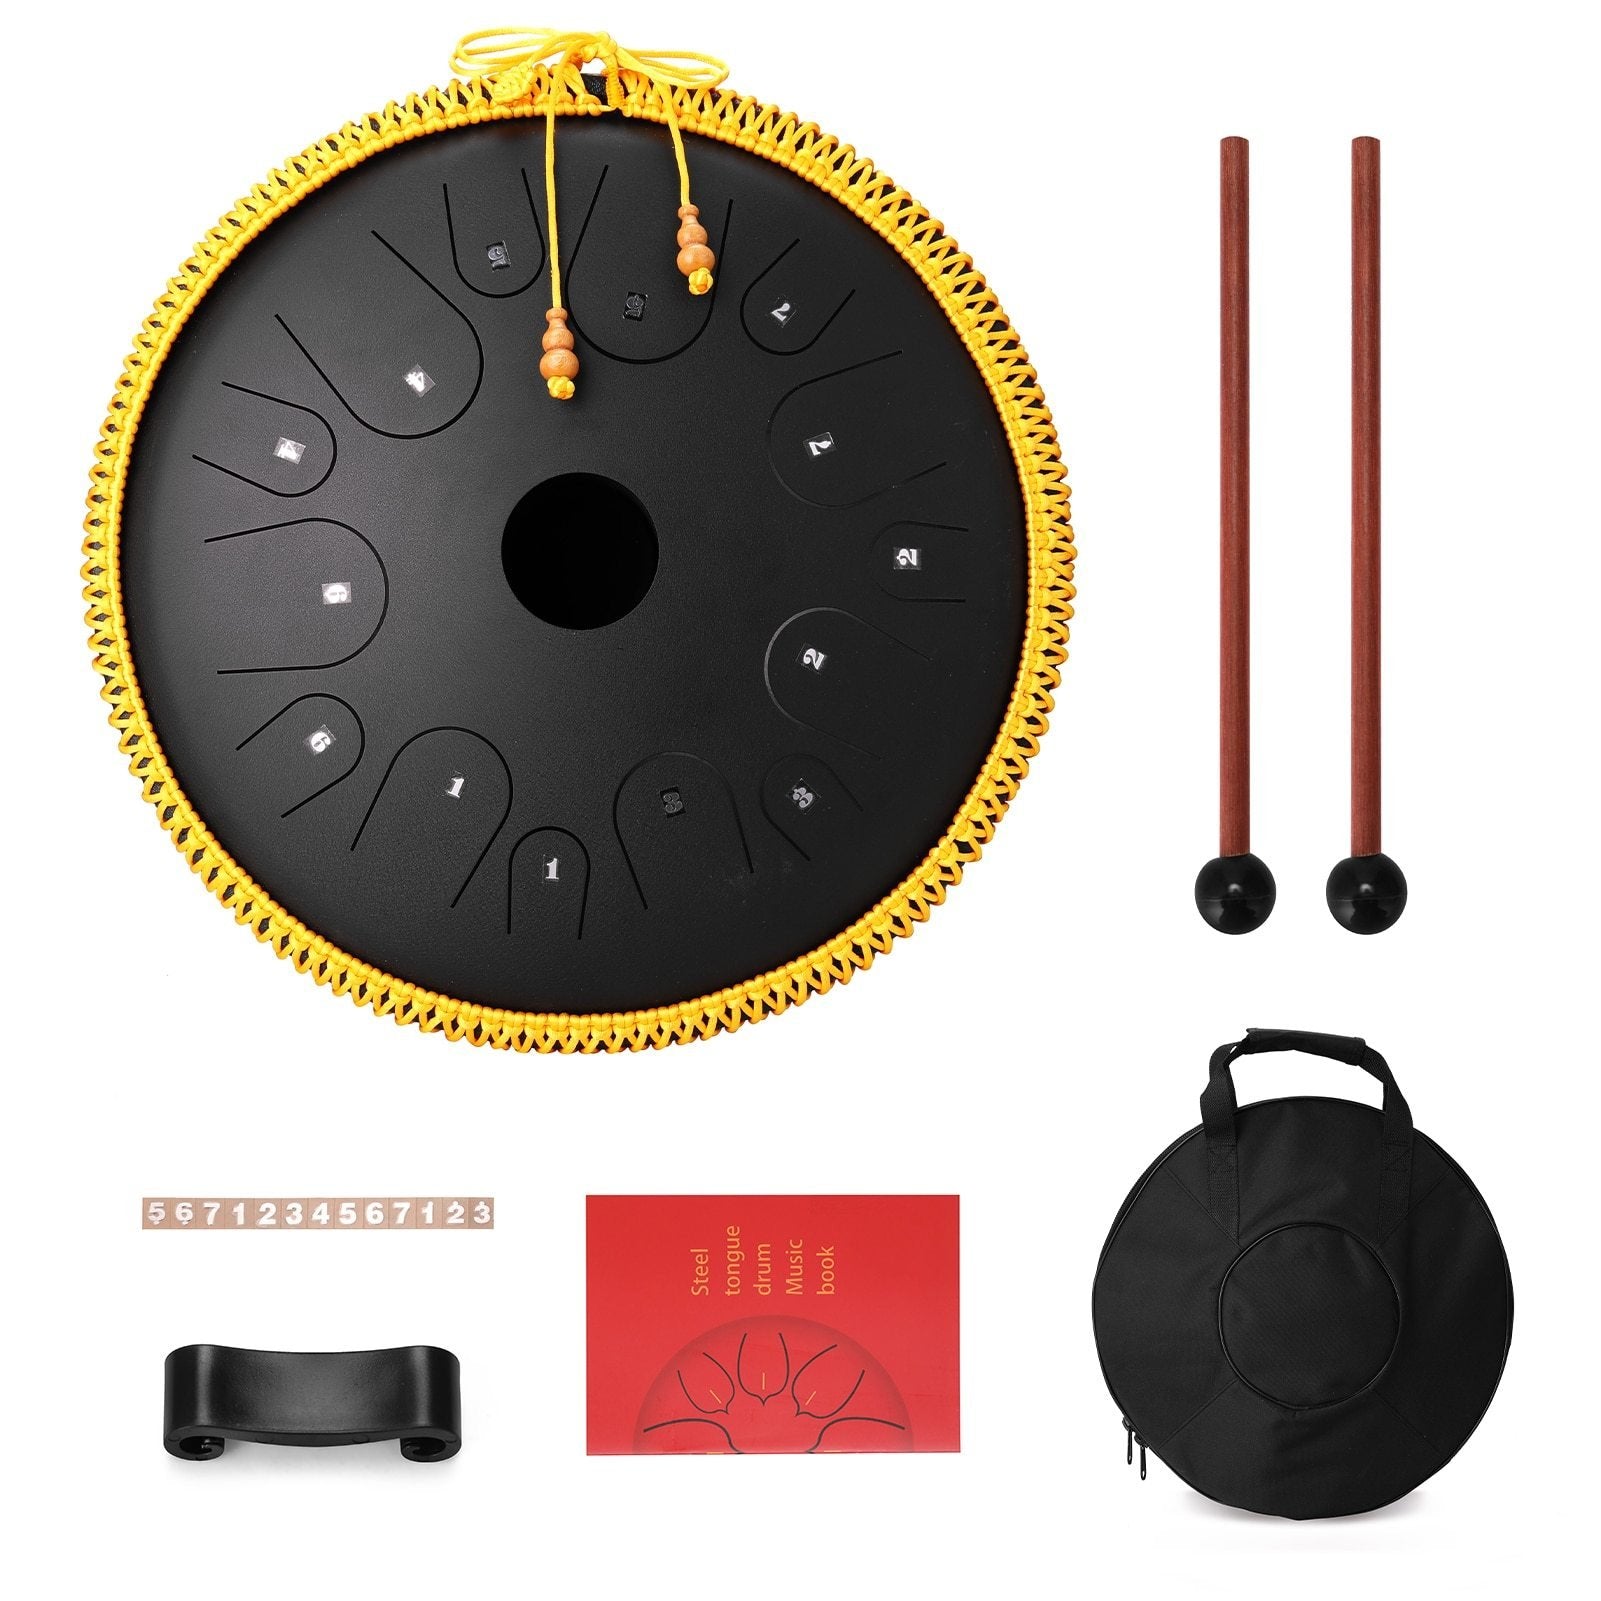 15 inch 14-Tone Steel Tongue Drum Mini Hand Pan Drums with Drumsticks Percussion Musical Instruments - AKLOT